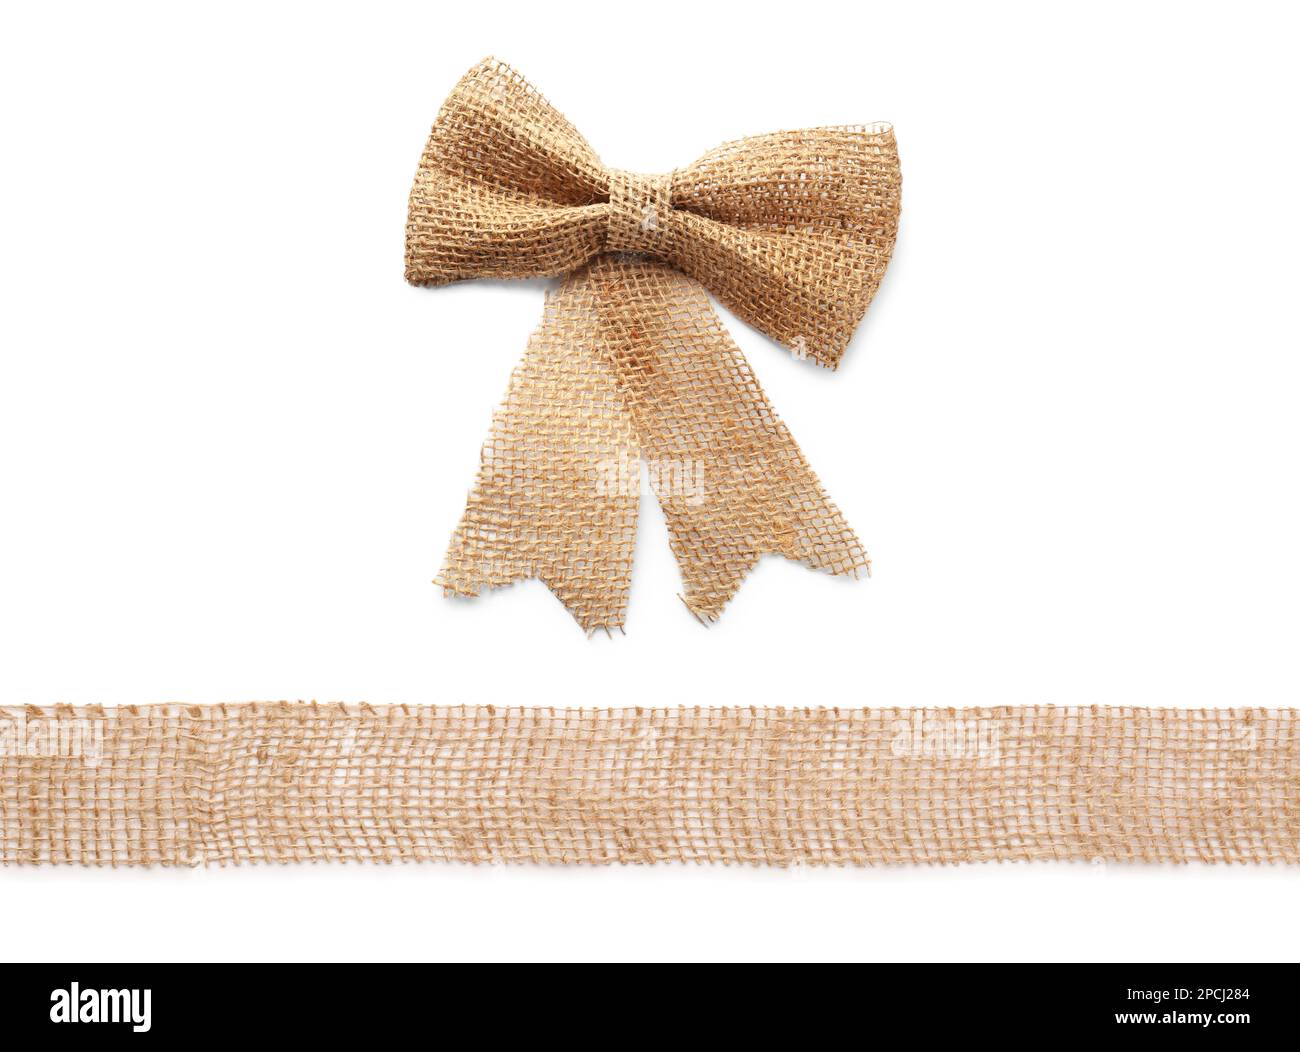 Pretty burlap bow and ribbon on white background Stock Photo - Alamy